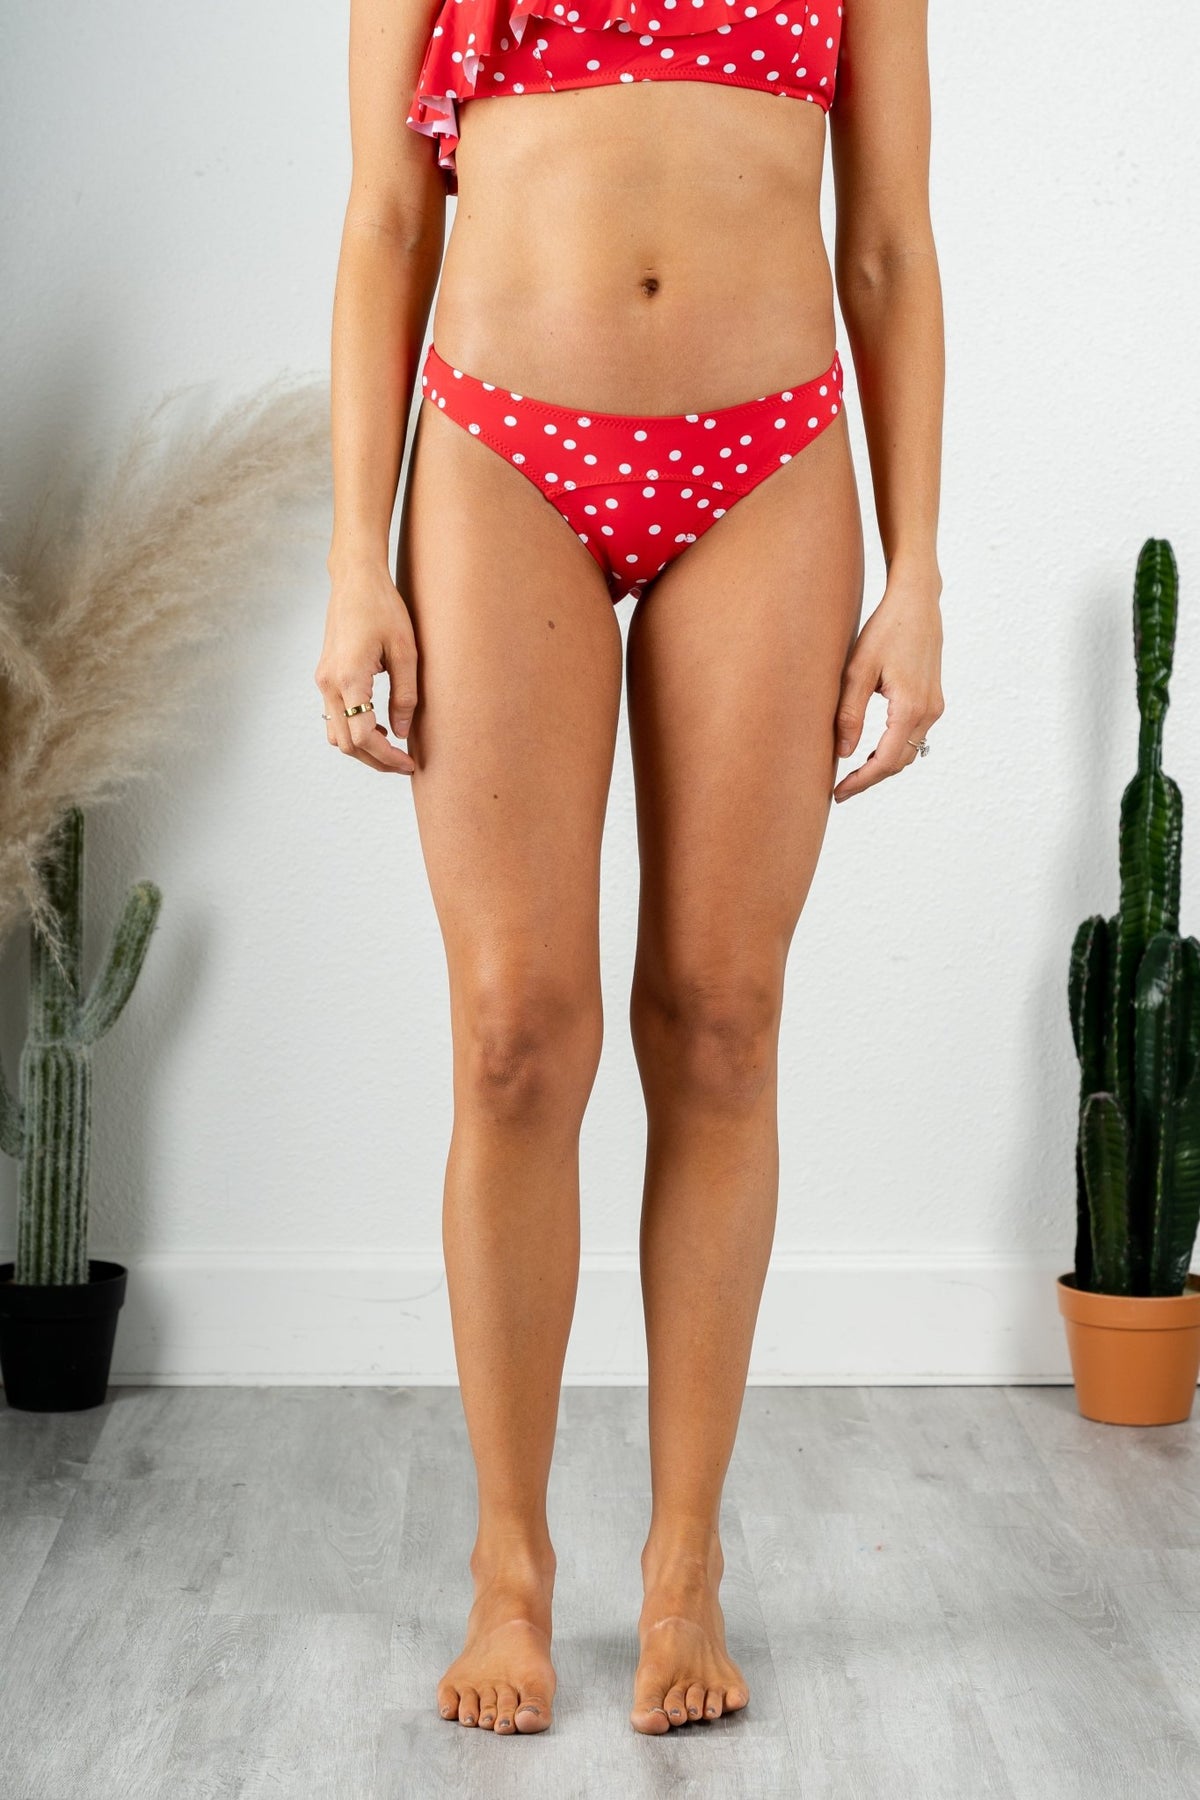 Polka dot swim bottoms red - Cute swimsuit - Trendy Swimsuits at Lush Fashion Lounge Boutique in Oklahoma City